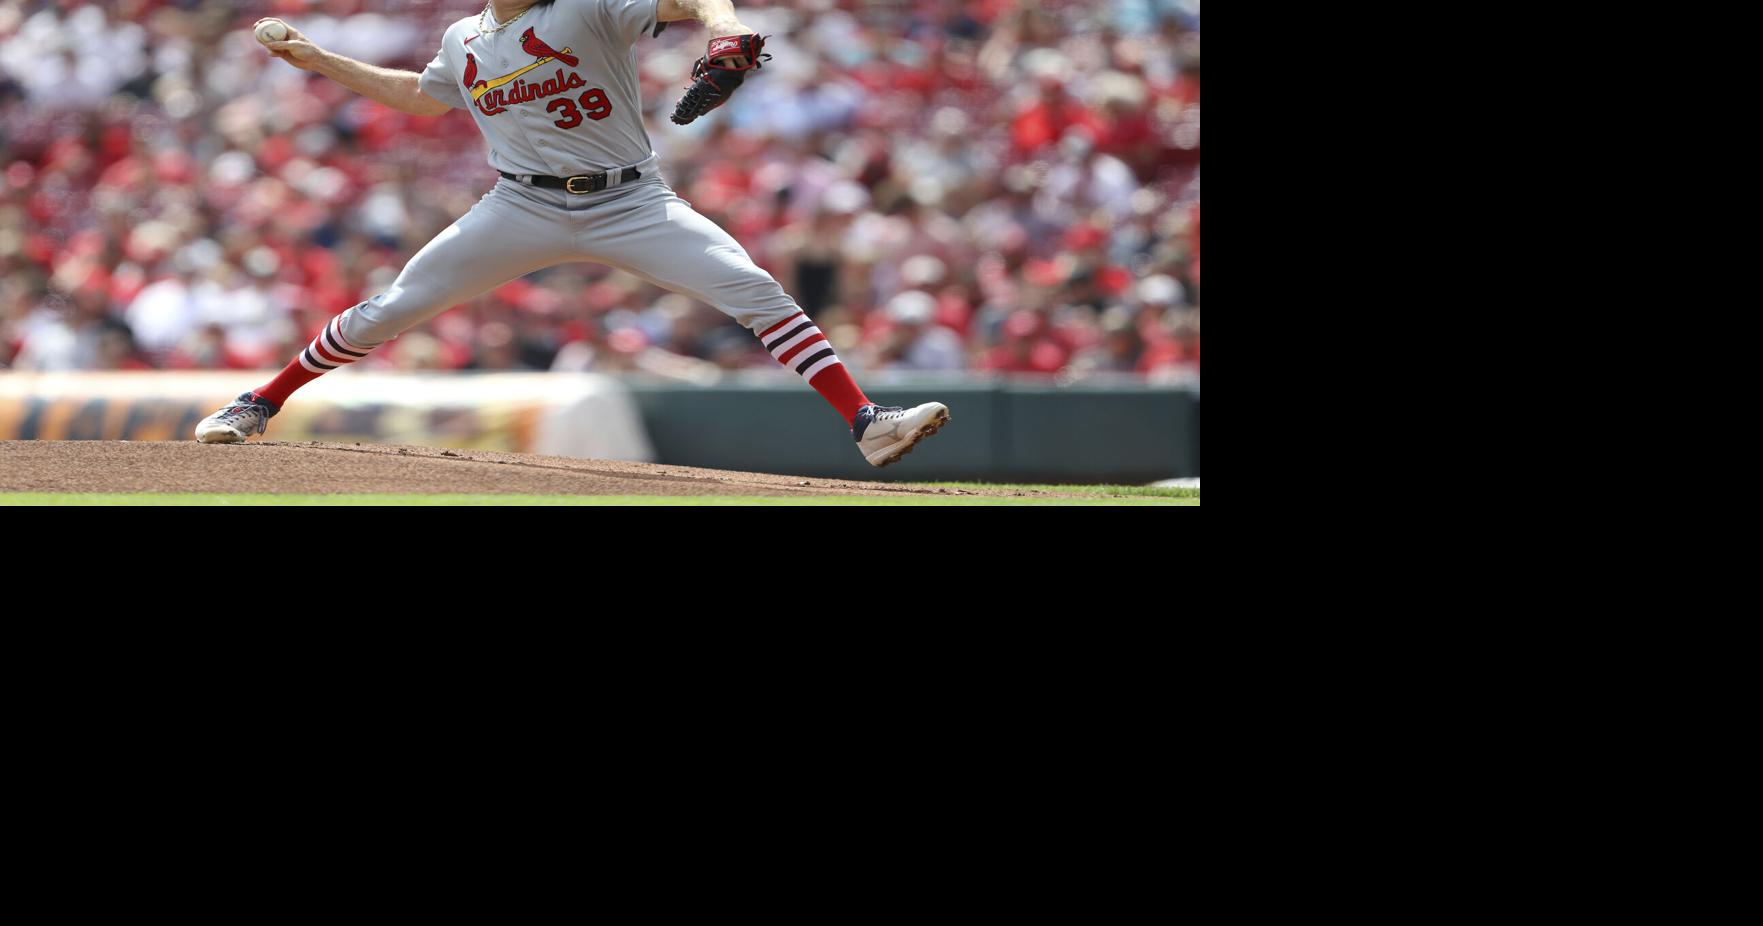 Cardinals stalwart Miles Mikolas knows how to get a grip in